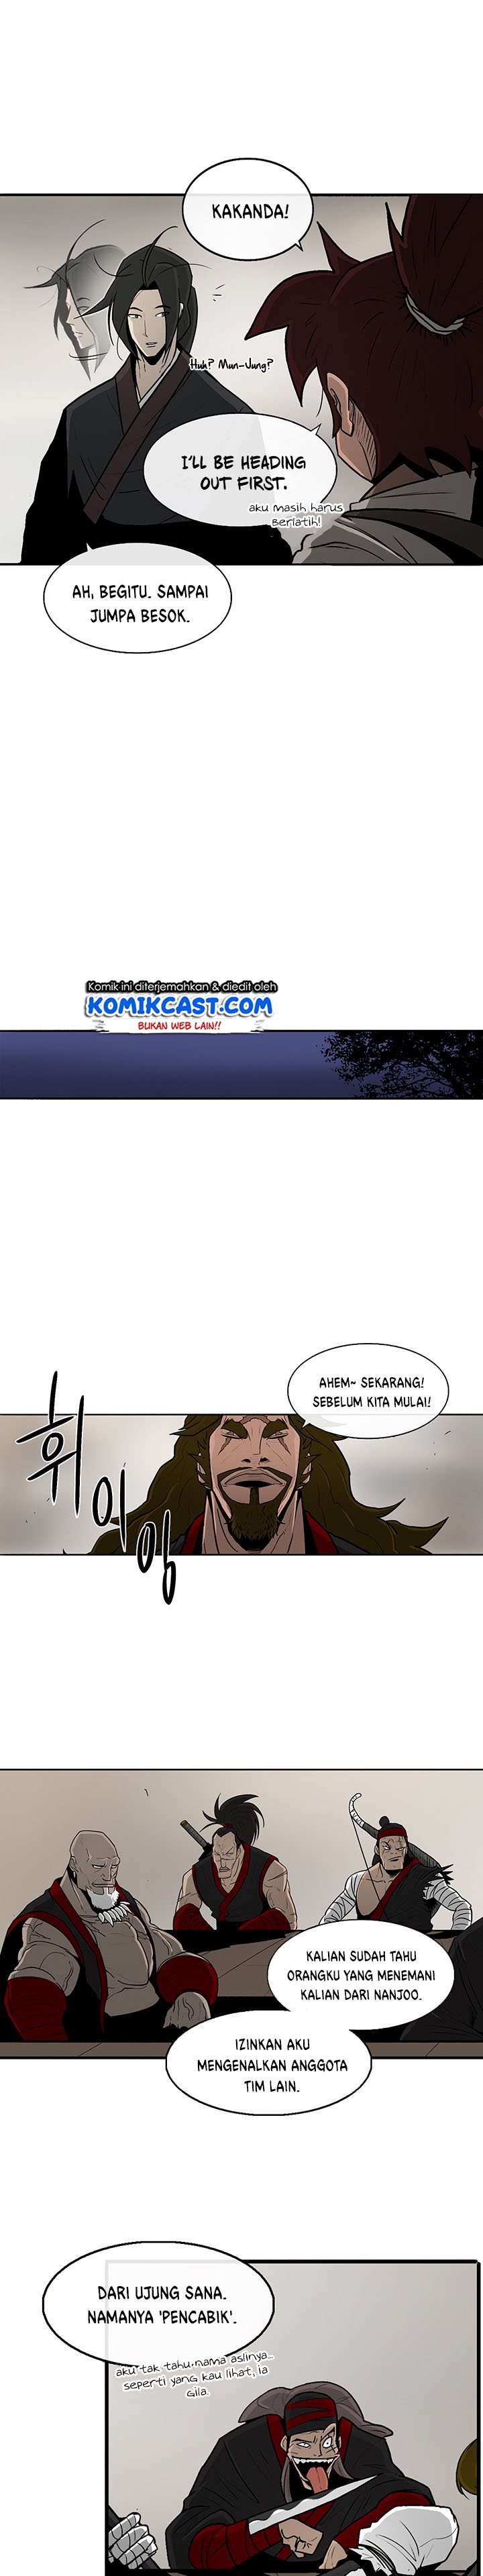 Legend of the Northern Blade Chapter 27